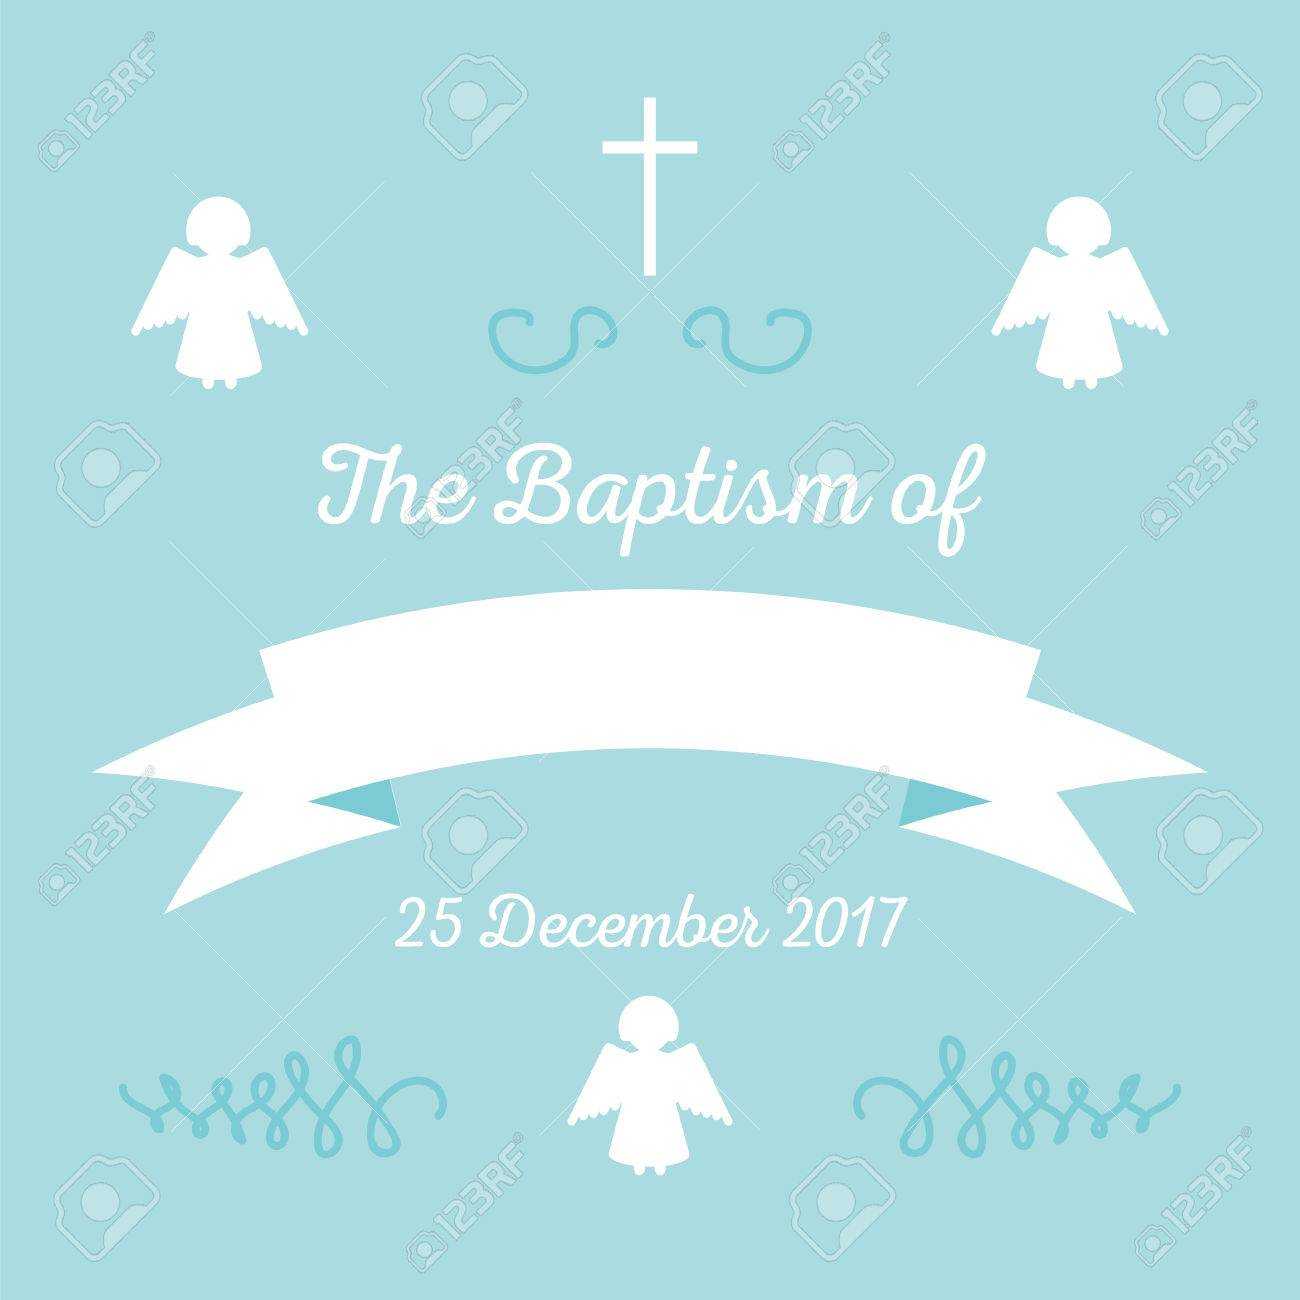 Baptism Invitation Card Template. Stock Vector Illustration For.. Throughout Christening Banner Template Free